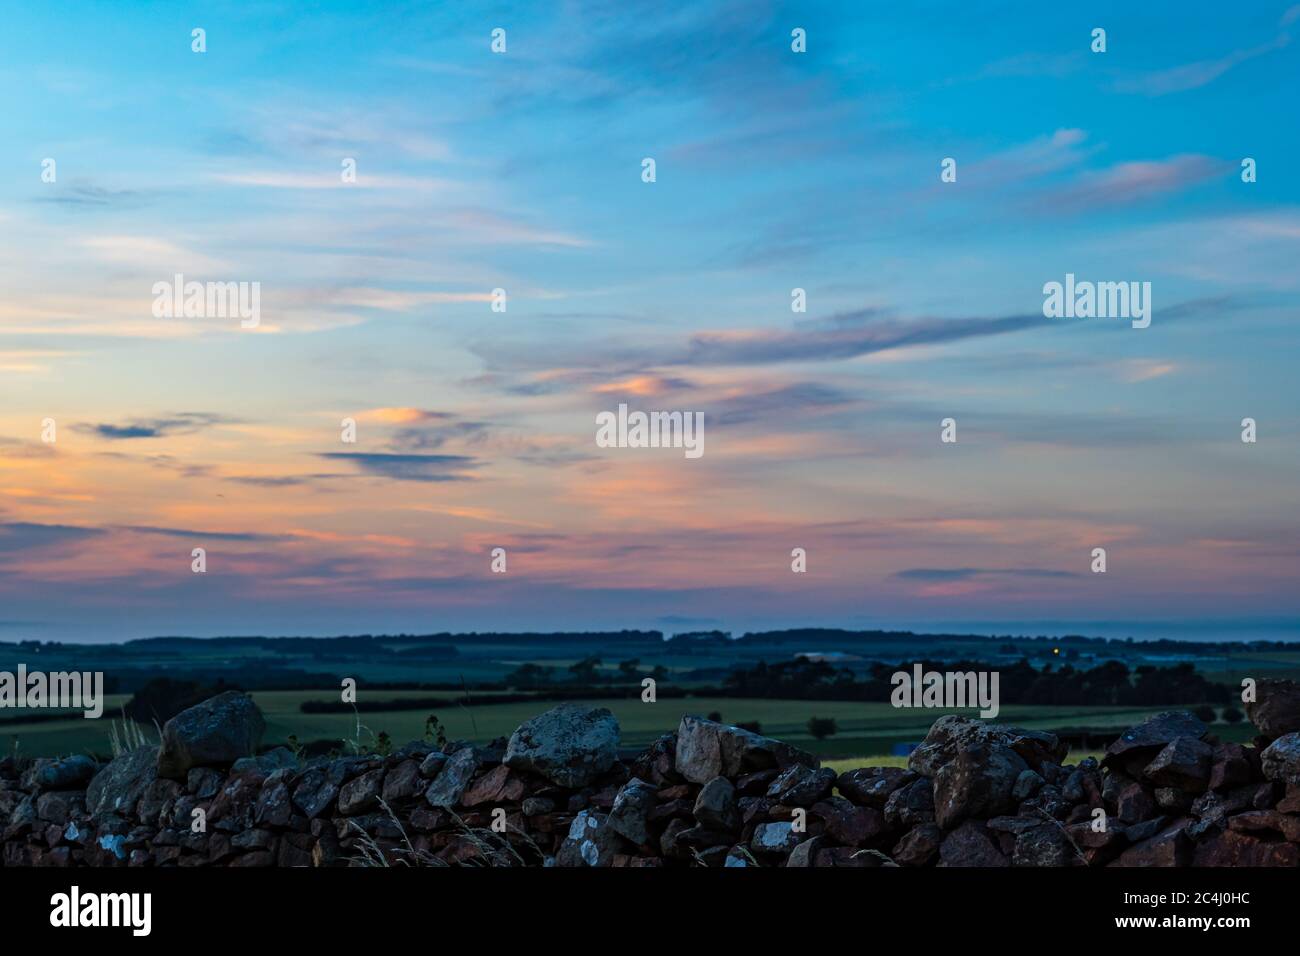 Colourful pink sky at dusk overlooking agricultural landscape, East Lothian, Scotland, UK Stock Photo